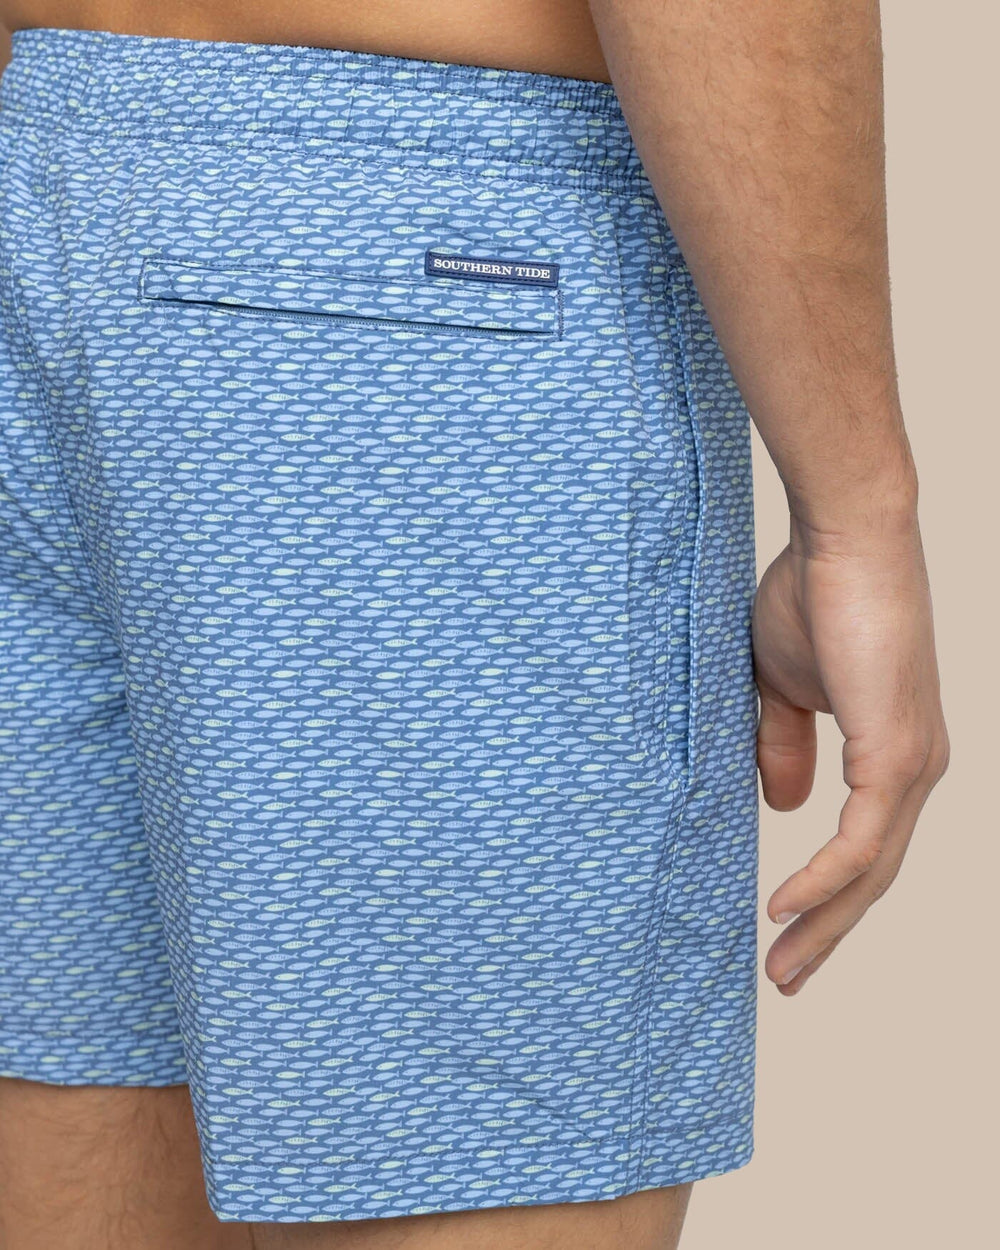 The detail view of the Southern Tide Casual Water Swim Trunk by Southern Tide - Coronet Blue